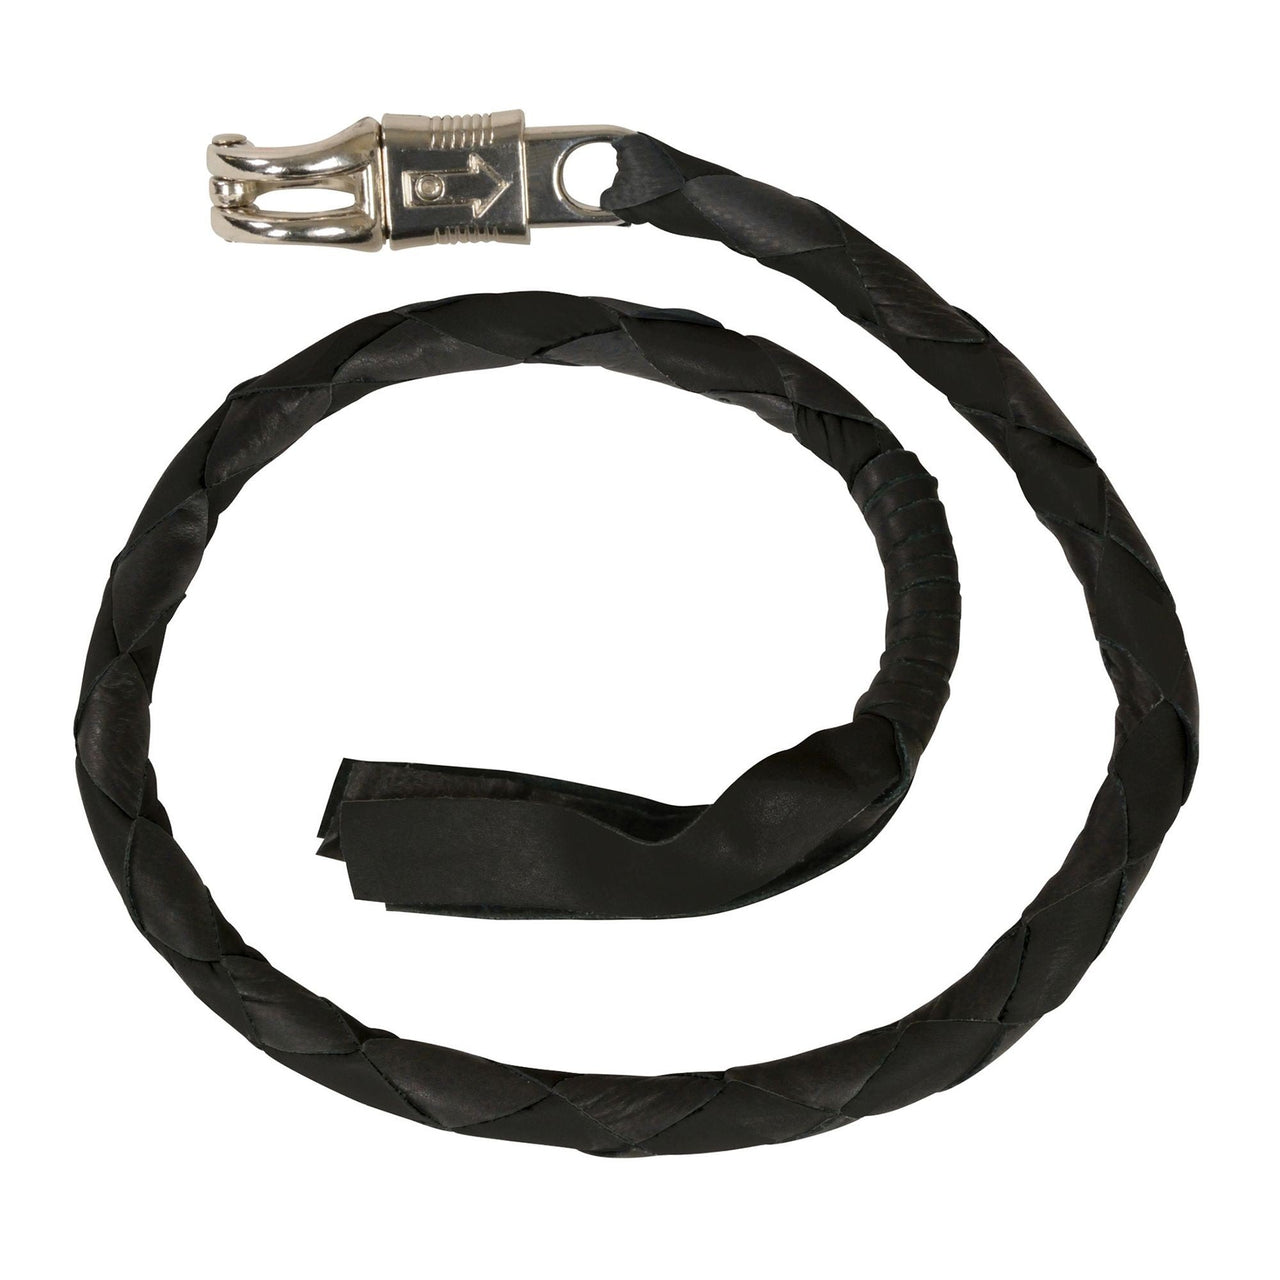 Leather "Get Back" Whip for Motorcycles - HighwayLeather